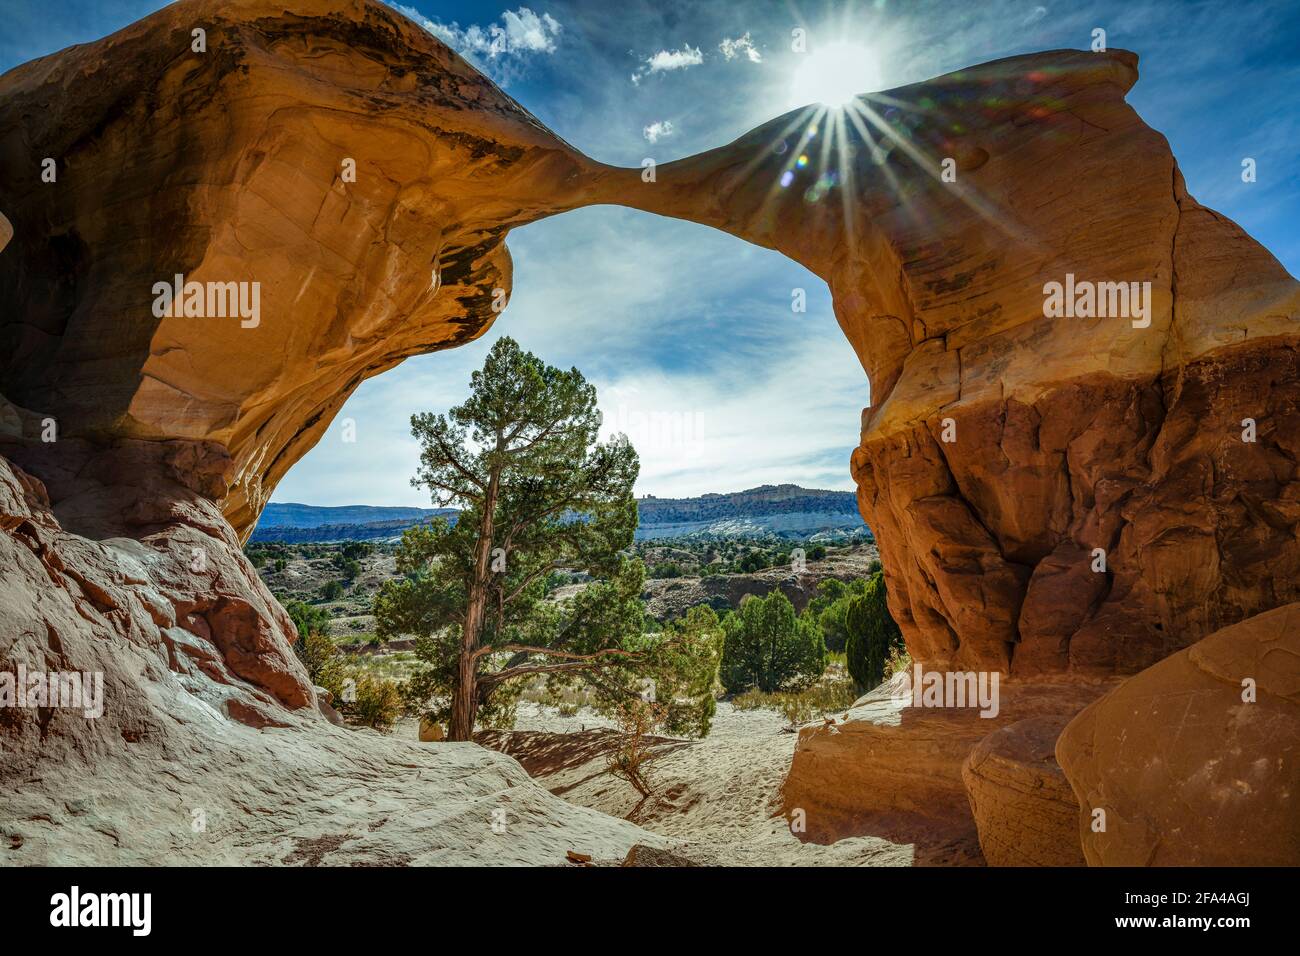 A vast network of cliffs, fins, and washes- the Devil’s Garden houses some of the most famous arches in the park and some of the most stunning vistas. Stock Photo